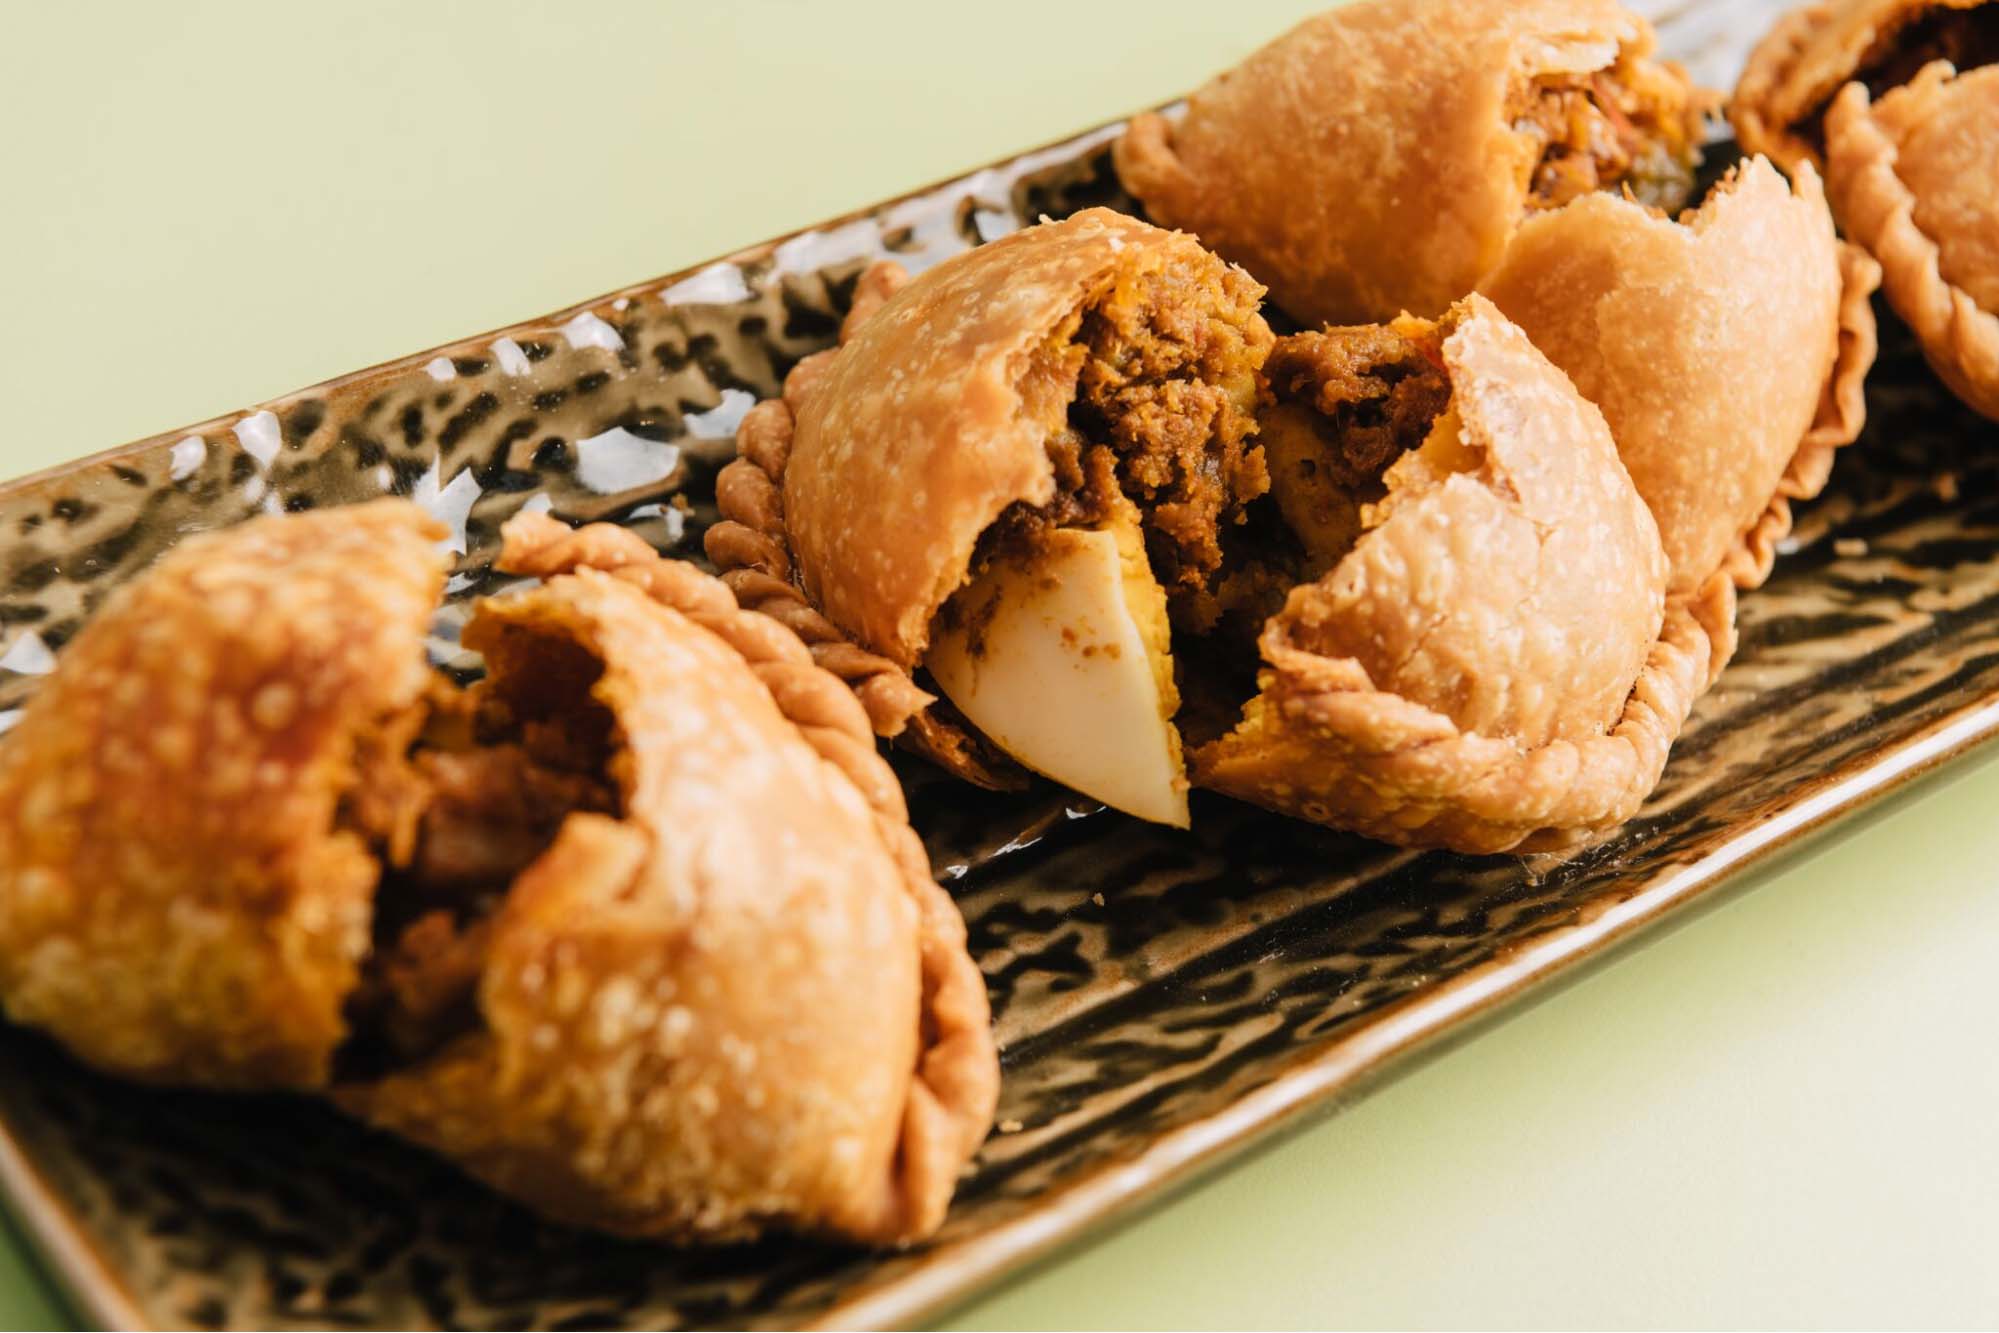 Michelin guide street food festival rolina traditional hainanese curry puff